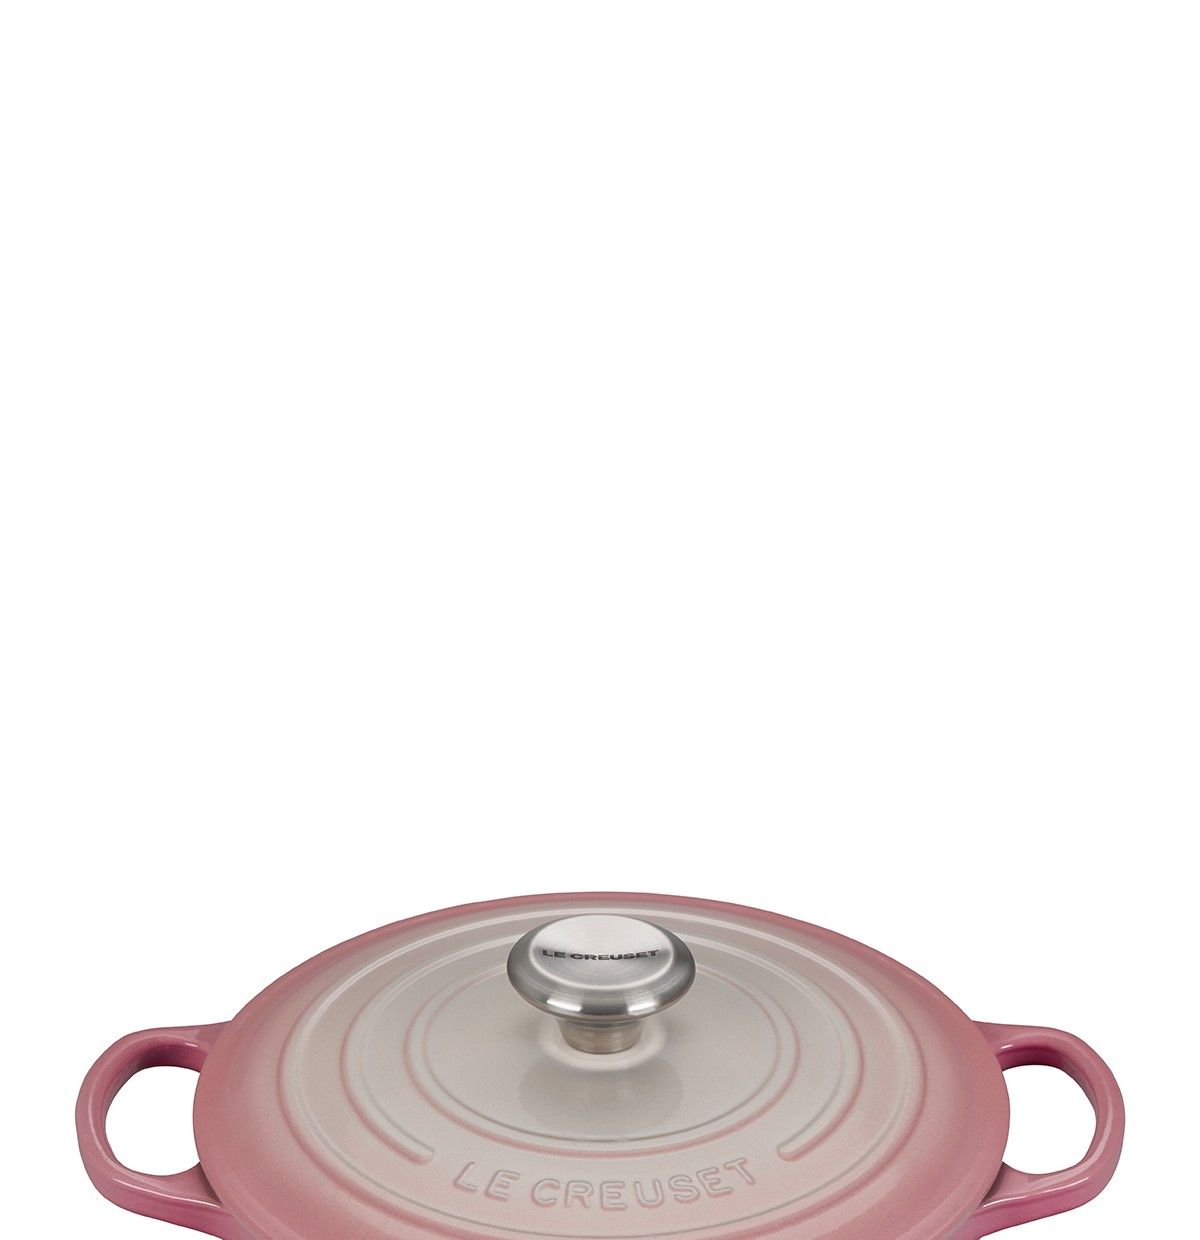 Le Creuset S Ombre Collection Is On Sale